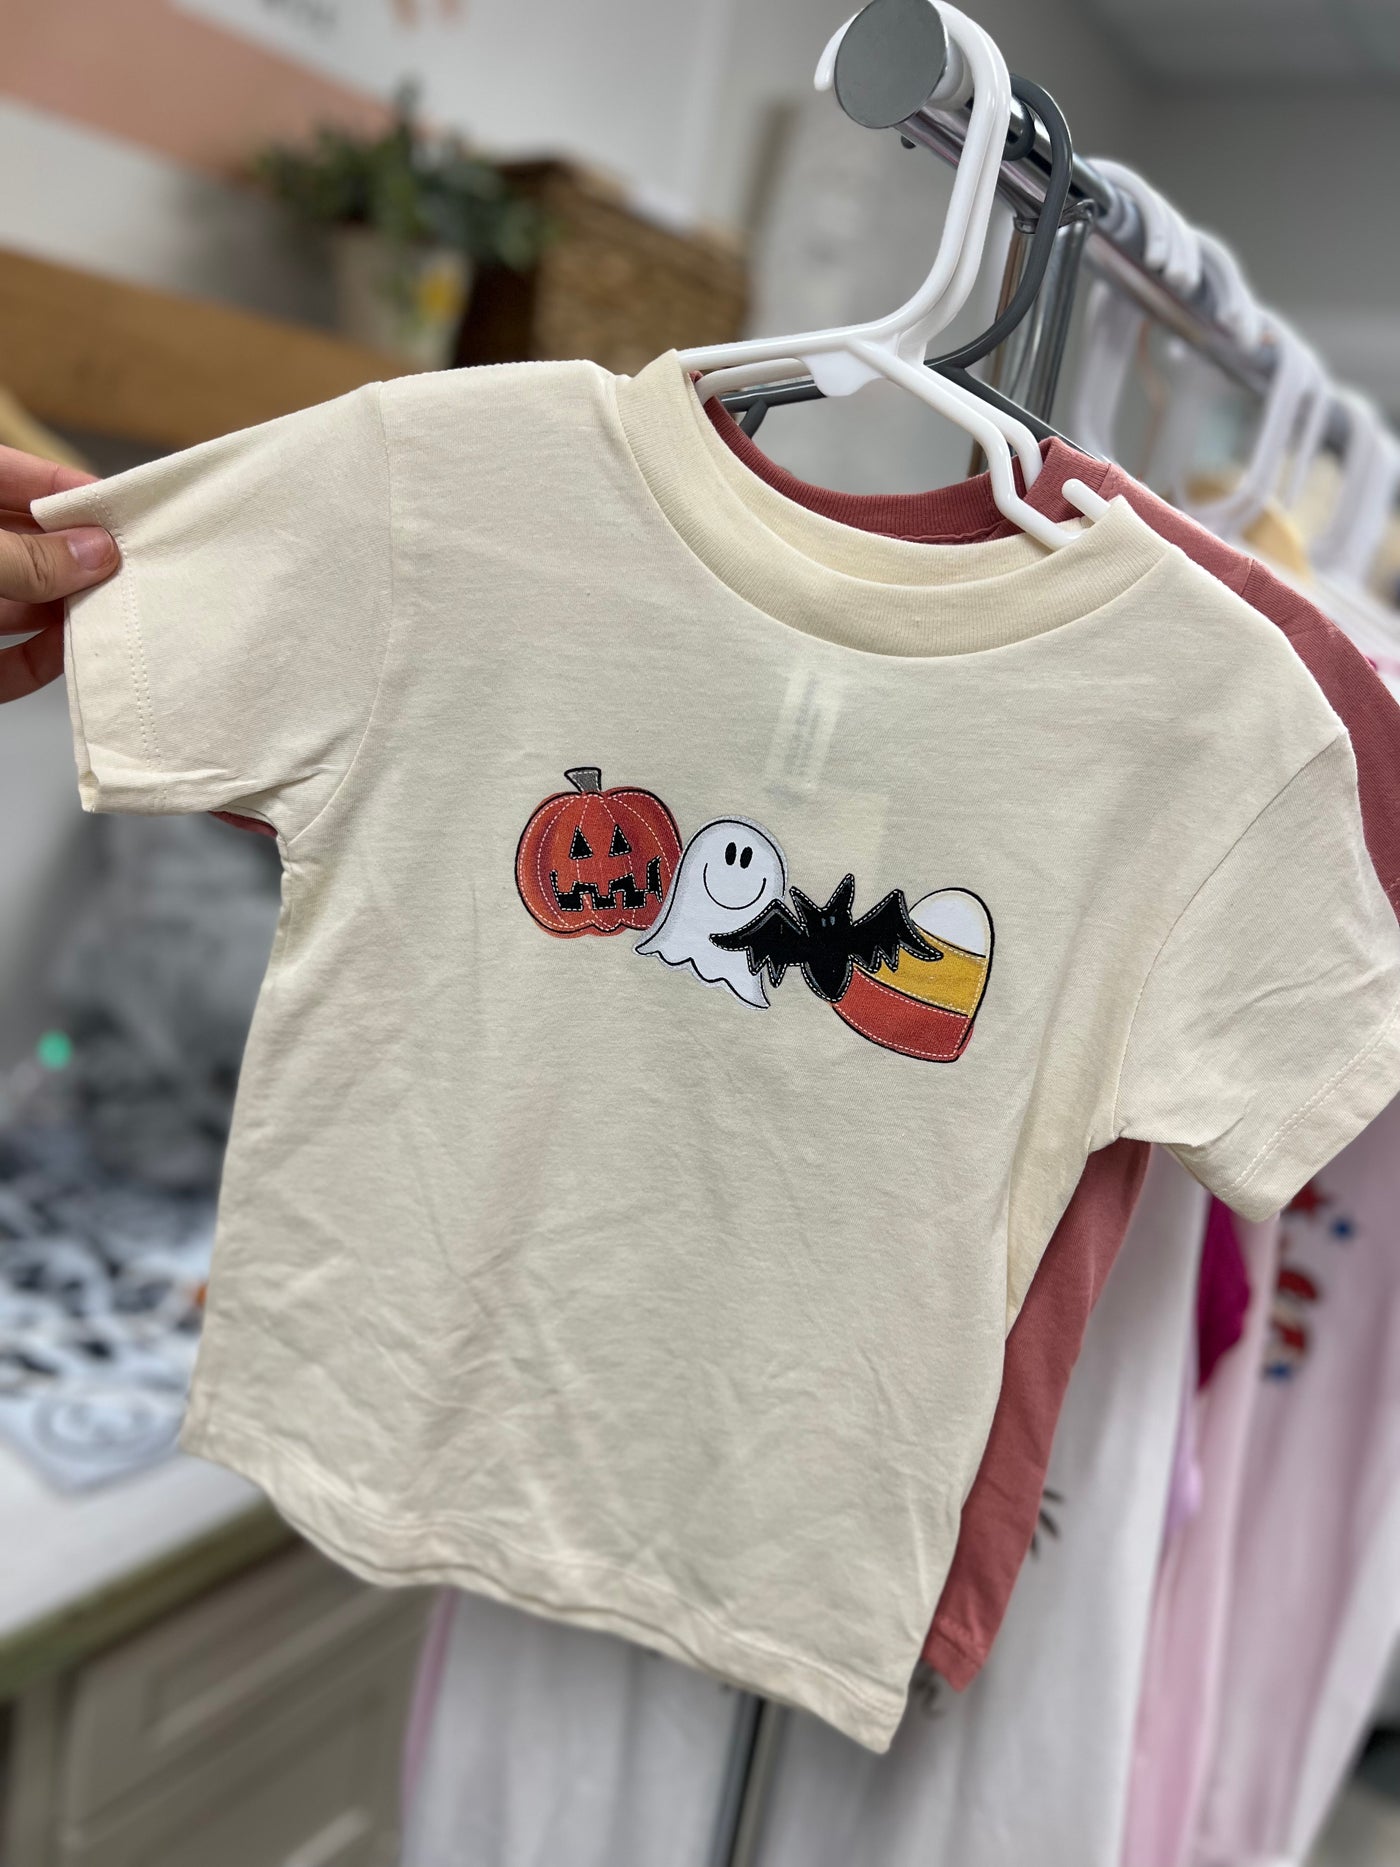 CLEARANCE: Size 2T "Halloween Things" Toddler T-shirt